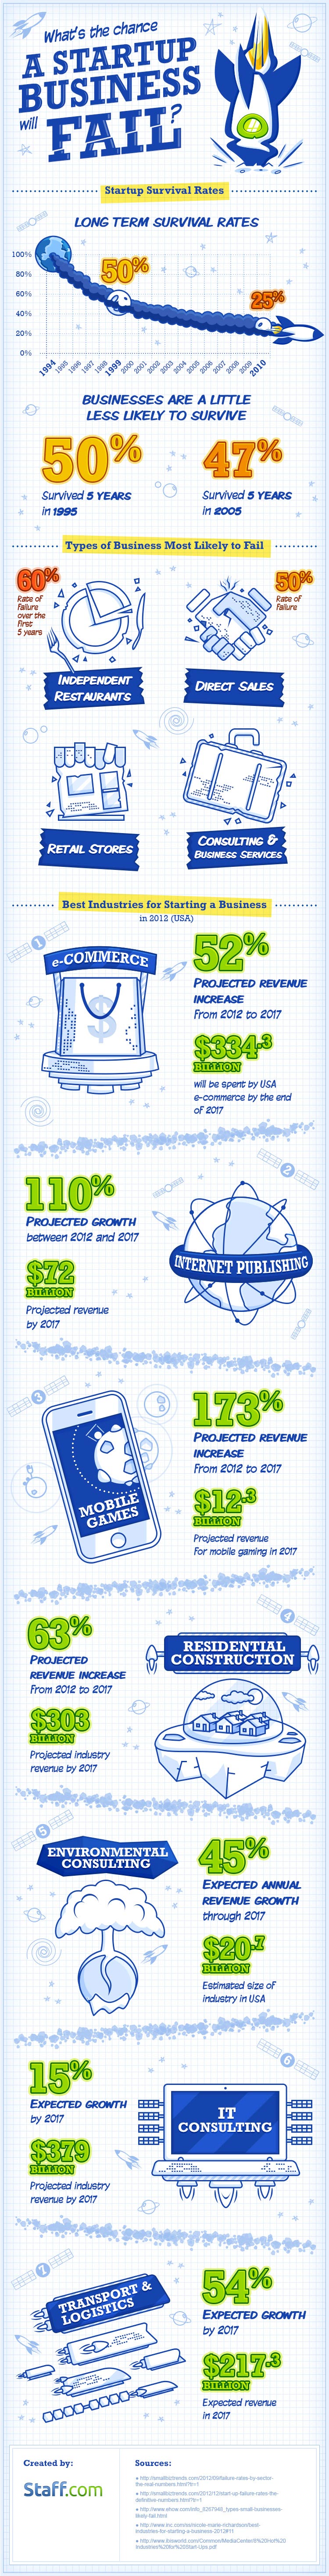 What Are The Chances of Survival of a Startup? [Infographic]